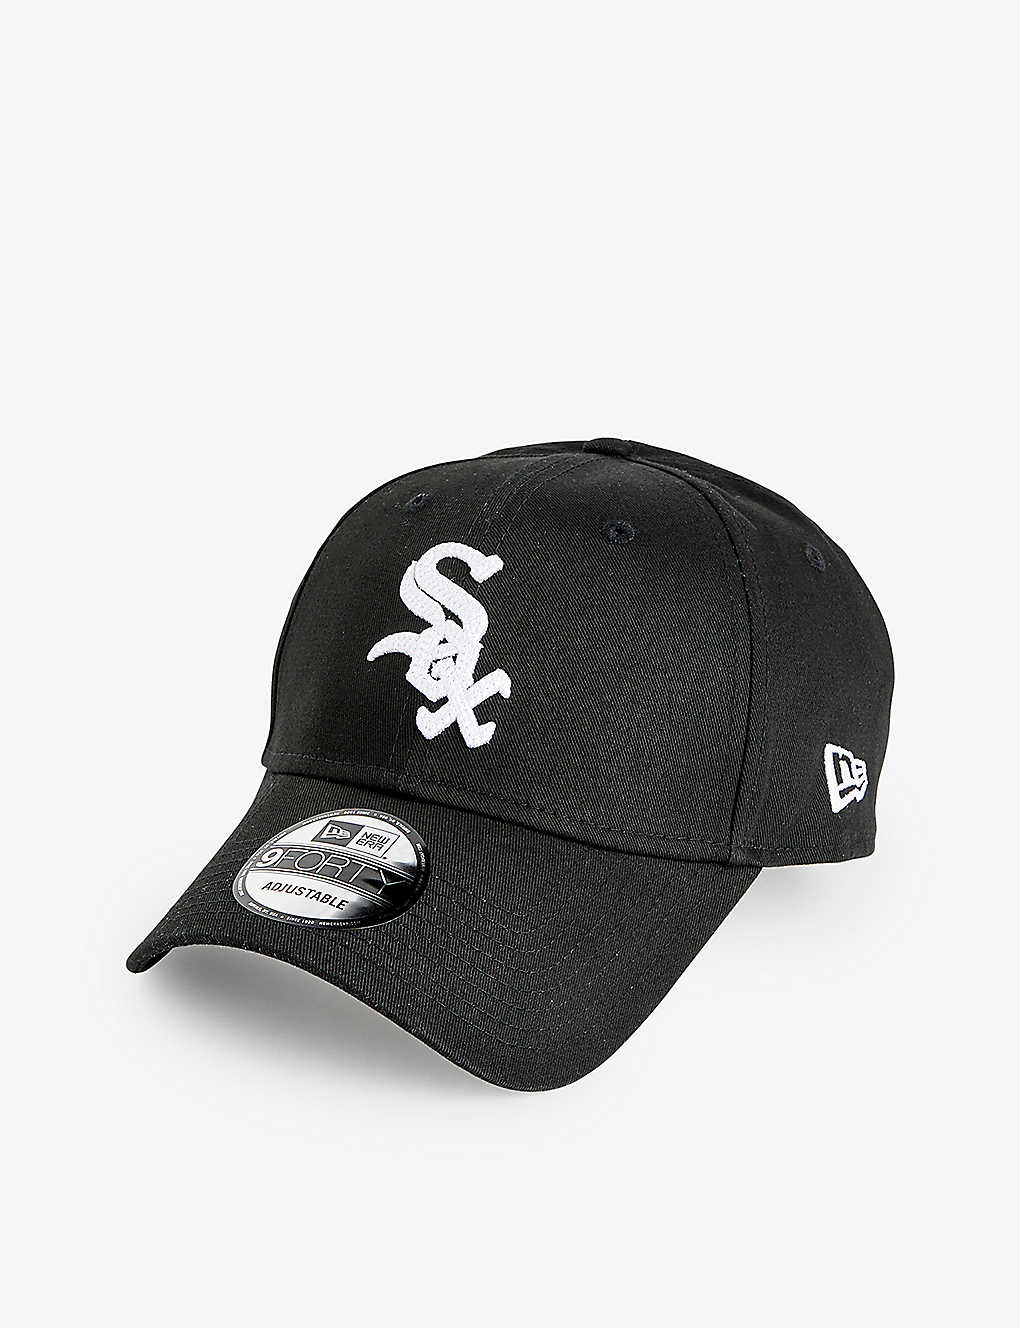 New Era Mens Black 9forty White Sox Brand-embroidered Cotton Cap